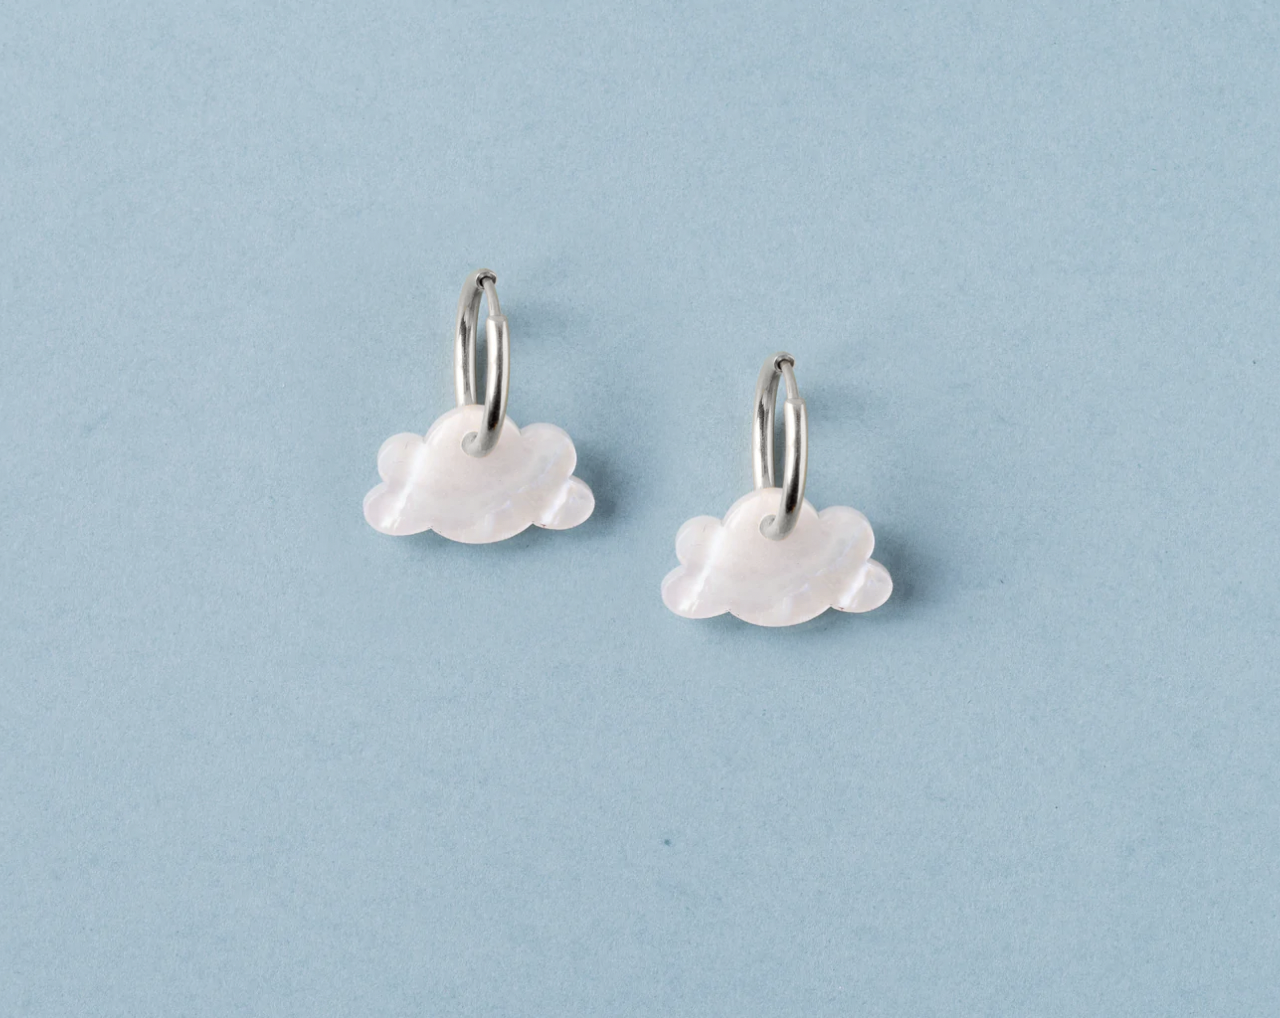 Pearly white cloud earrings with hoops